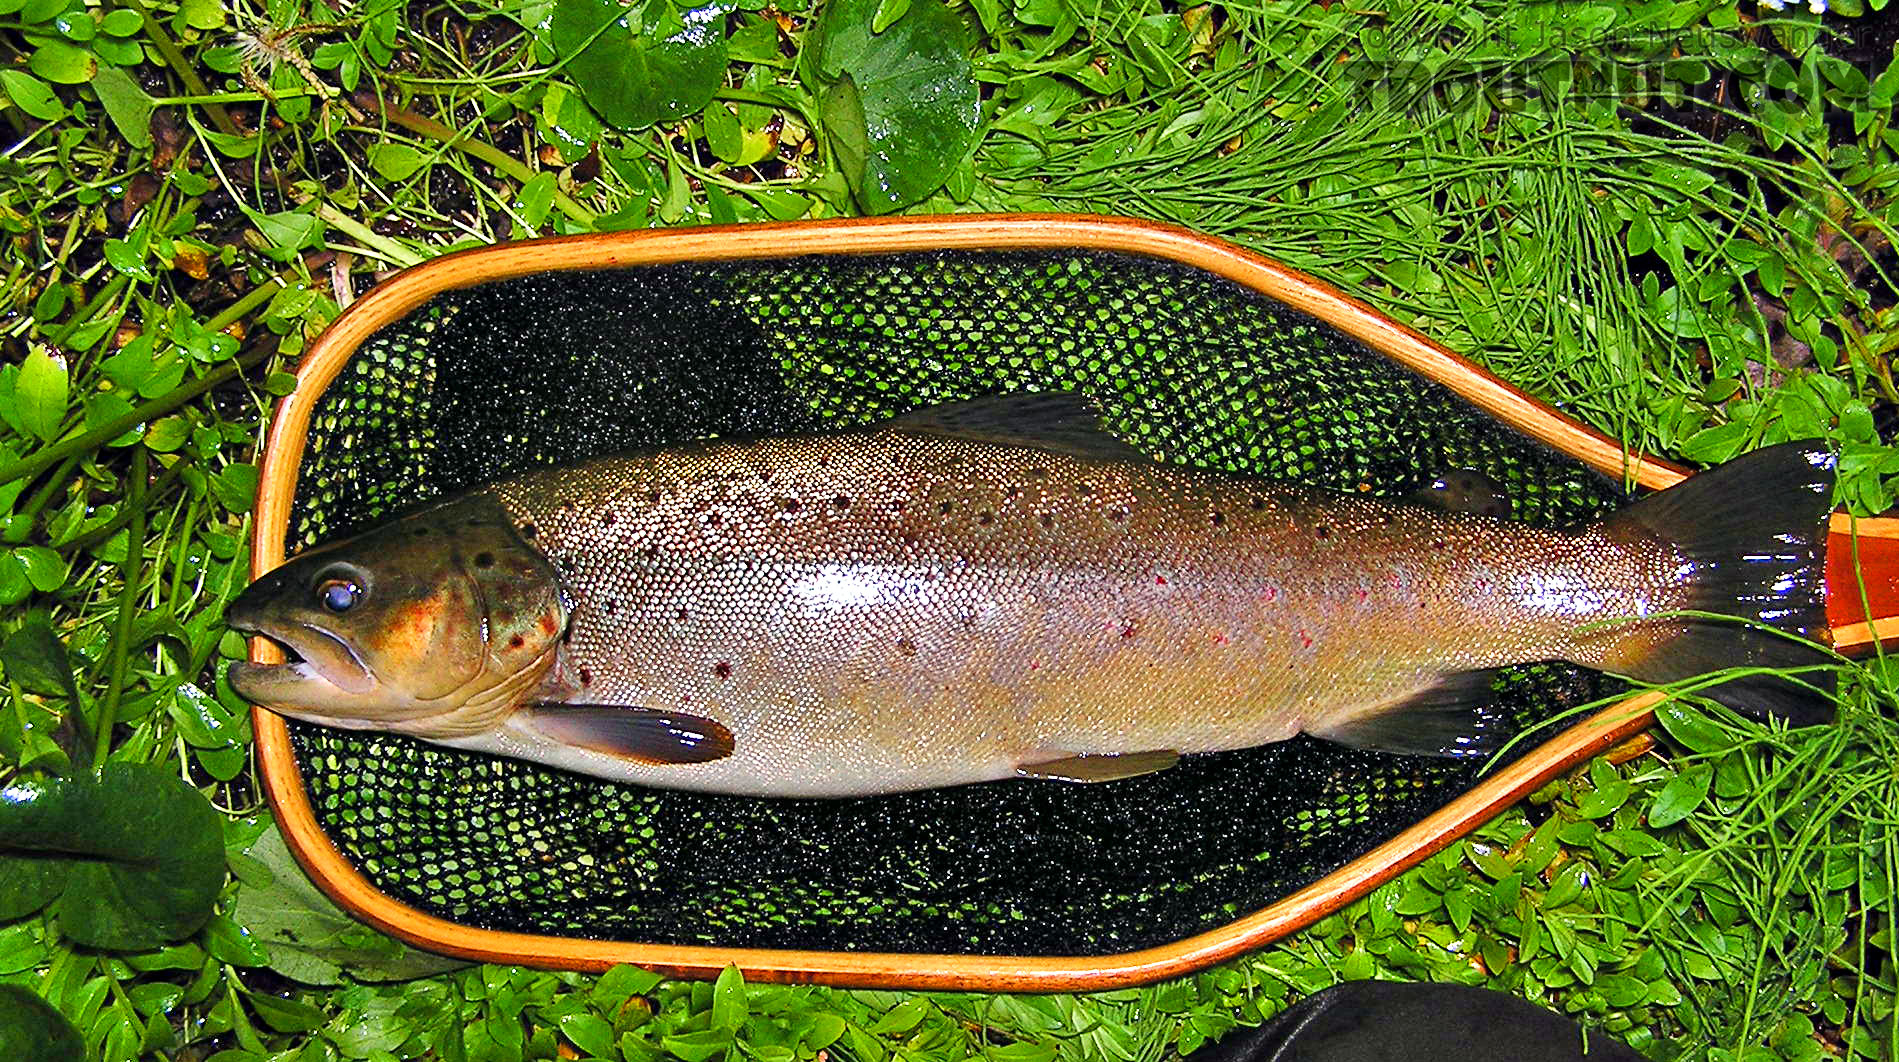 After the Hex hatch has been going for a few days, it doesn't take much to get some big fish working.  This 18 inch brown revealed himself with one or two rises to sporadic bugs during a dud of a dun emergence. From the Namekagon River in Wisconsin.